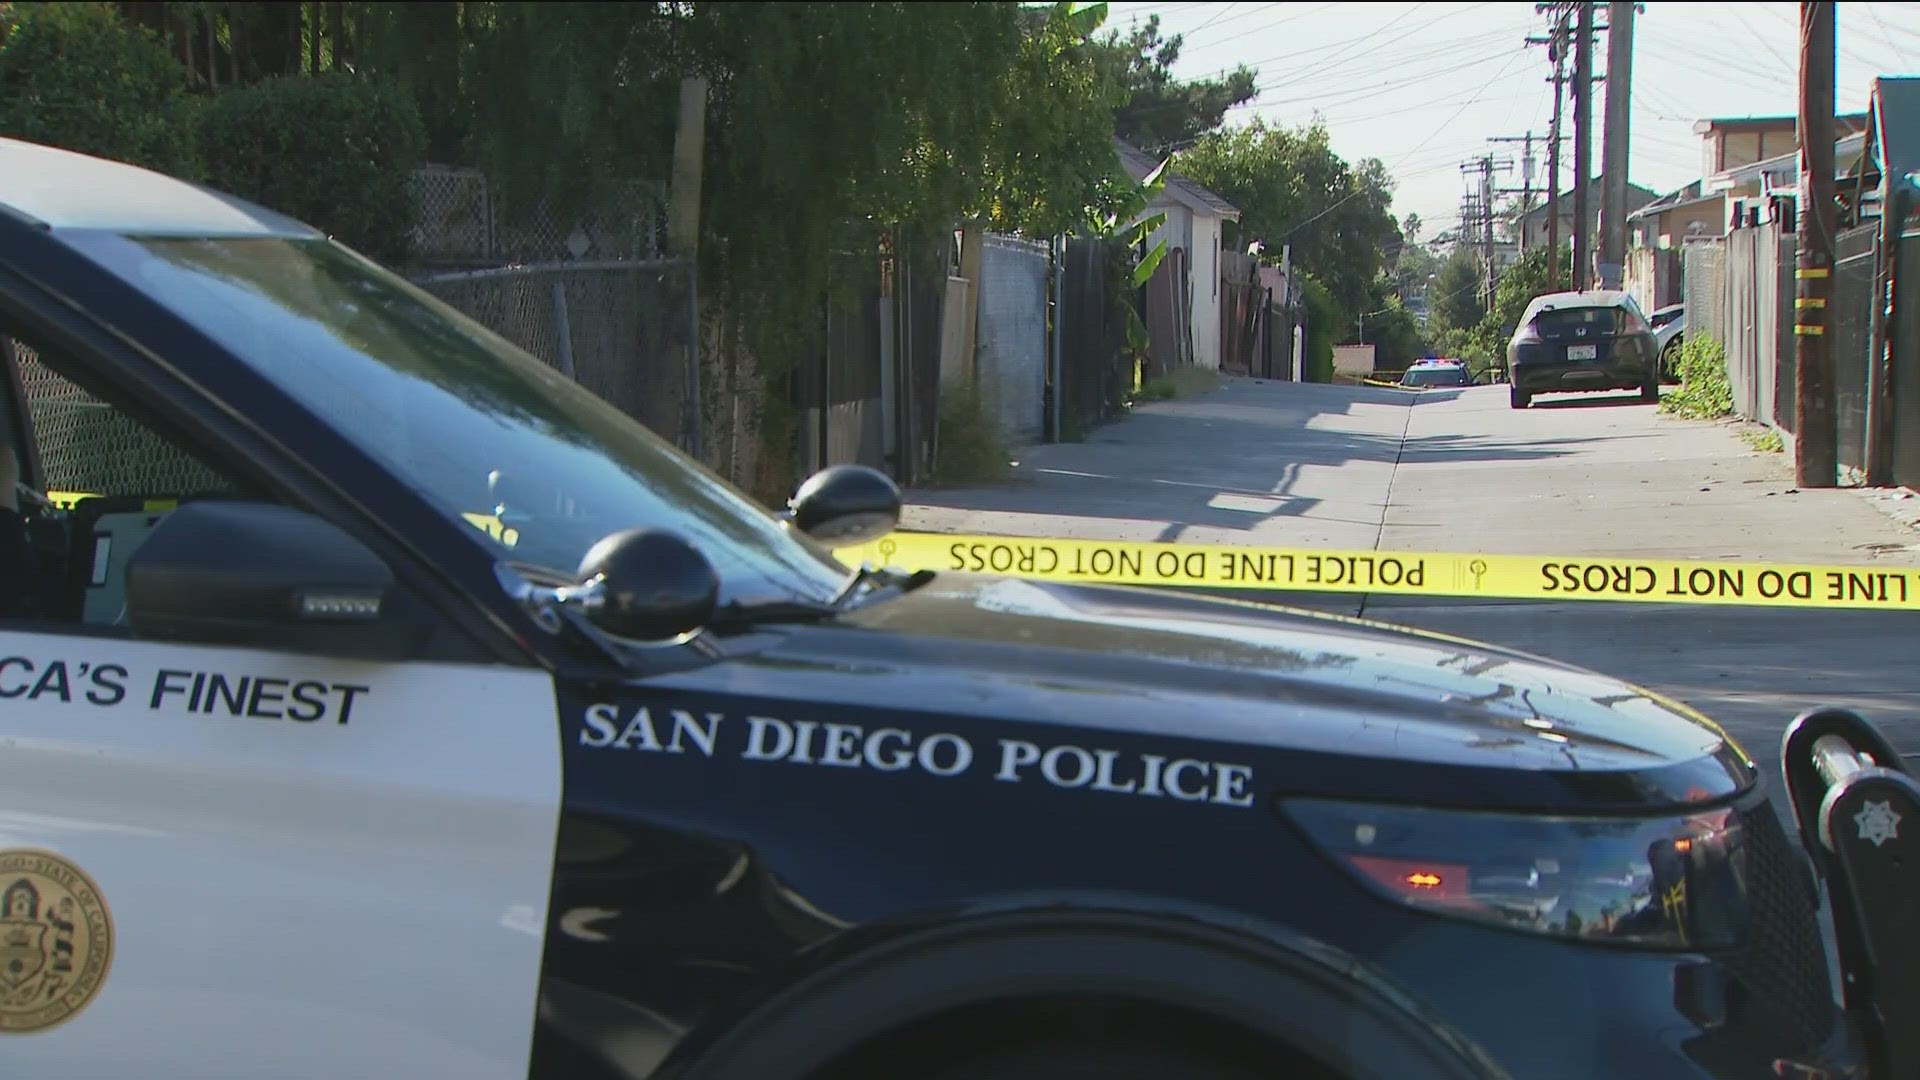 A man is dead following a shooting with San Diego Police after they responded to a shooting call Monday night.